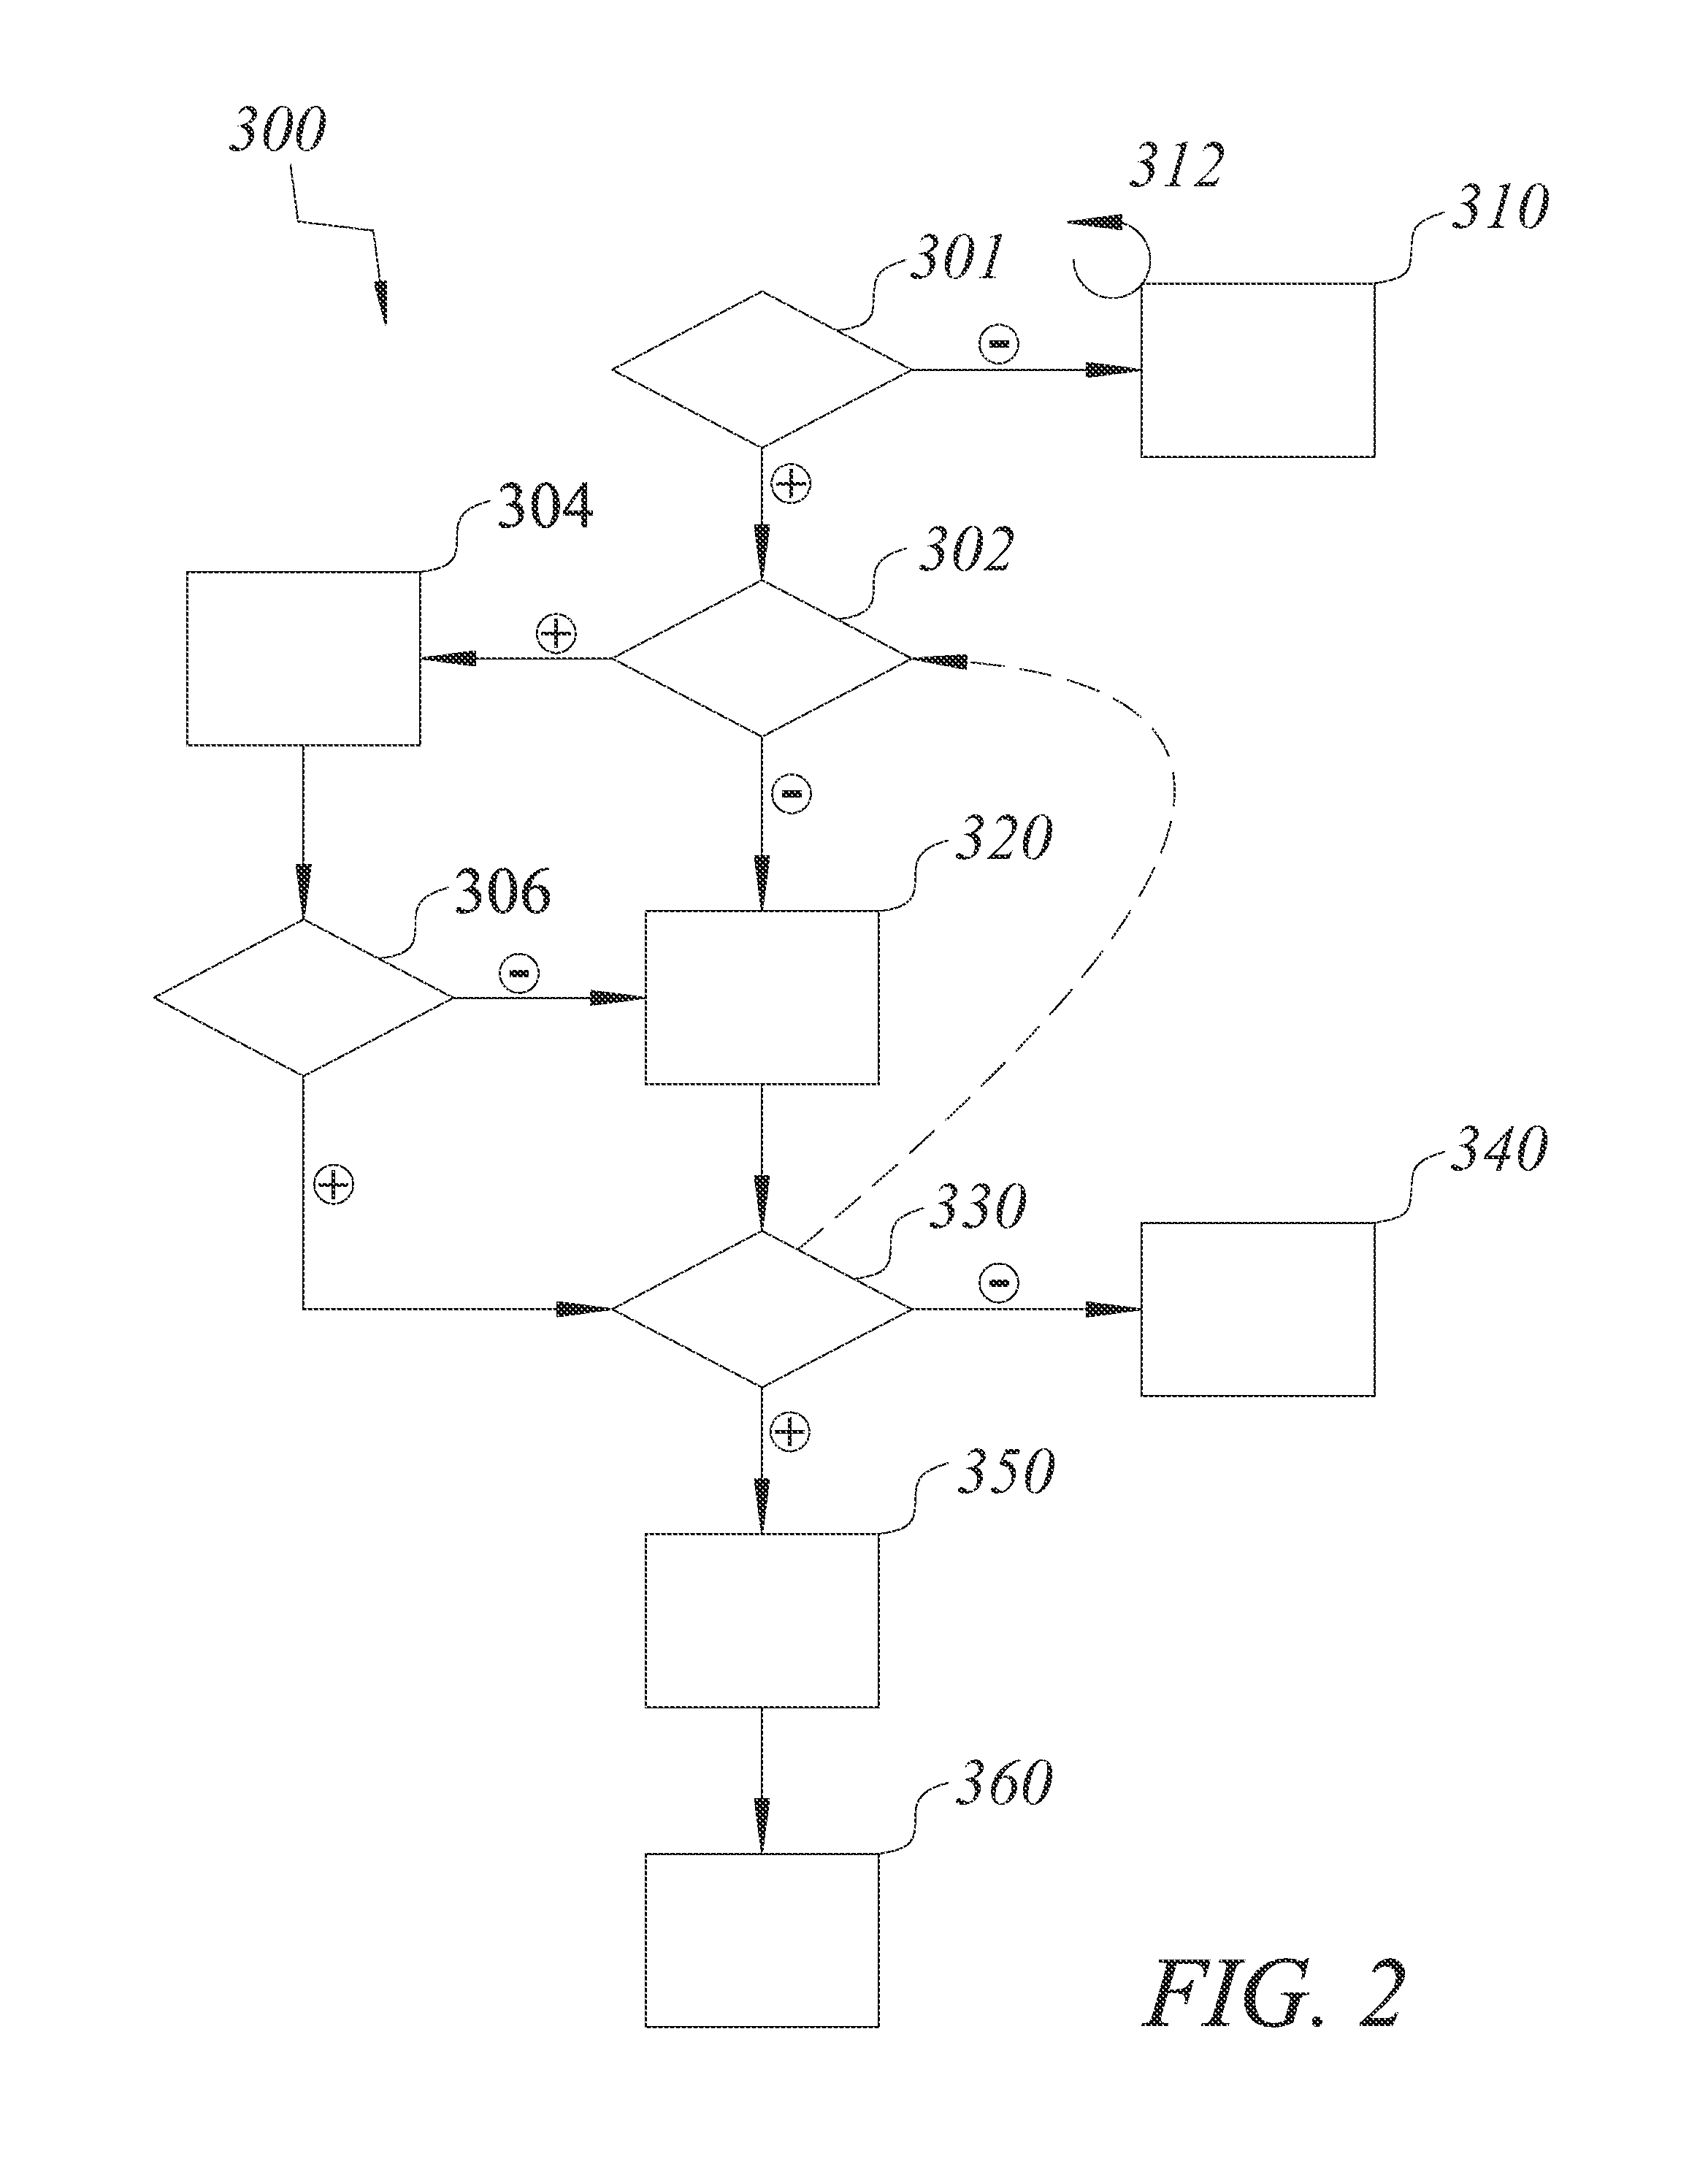 Method and device for simultaneously documenting and treating tension pneumothorax and/or hemothorax